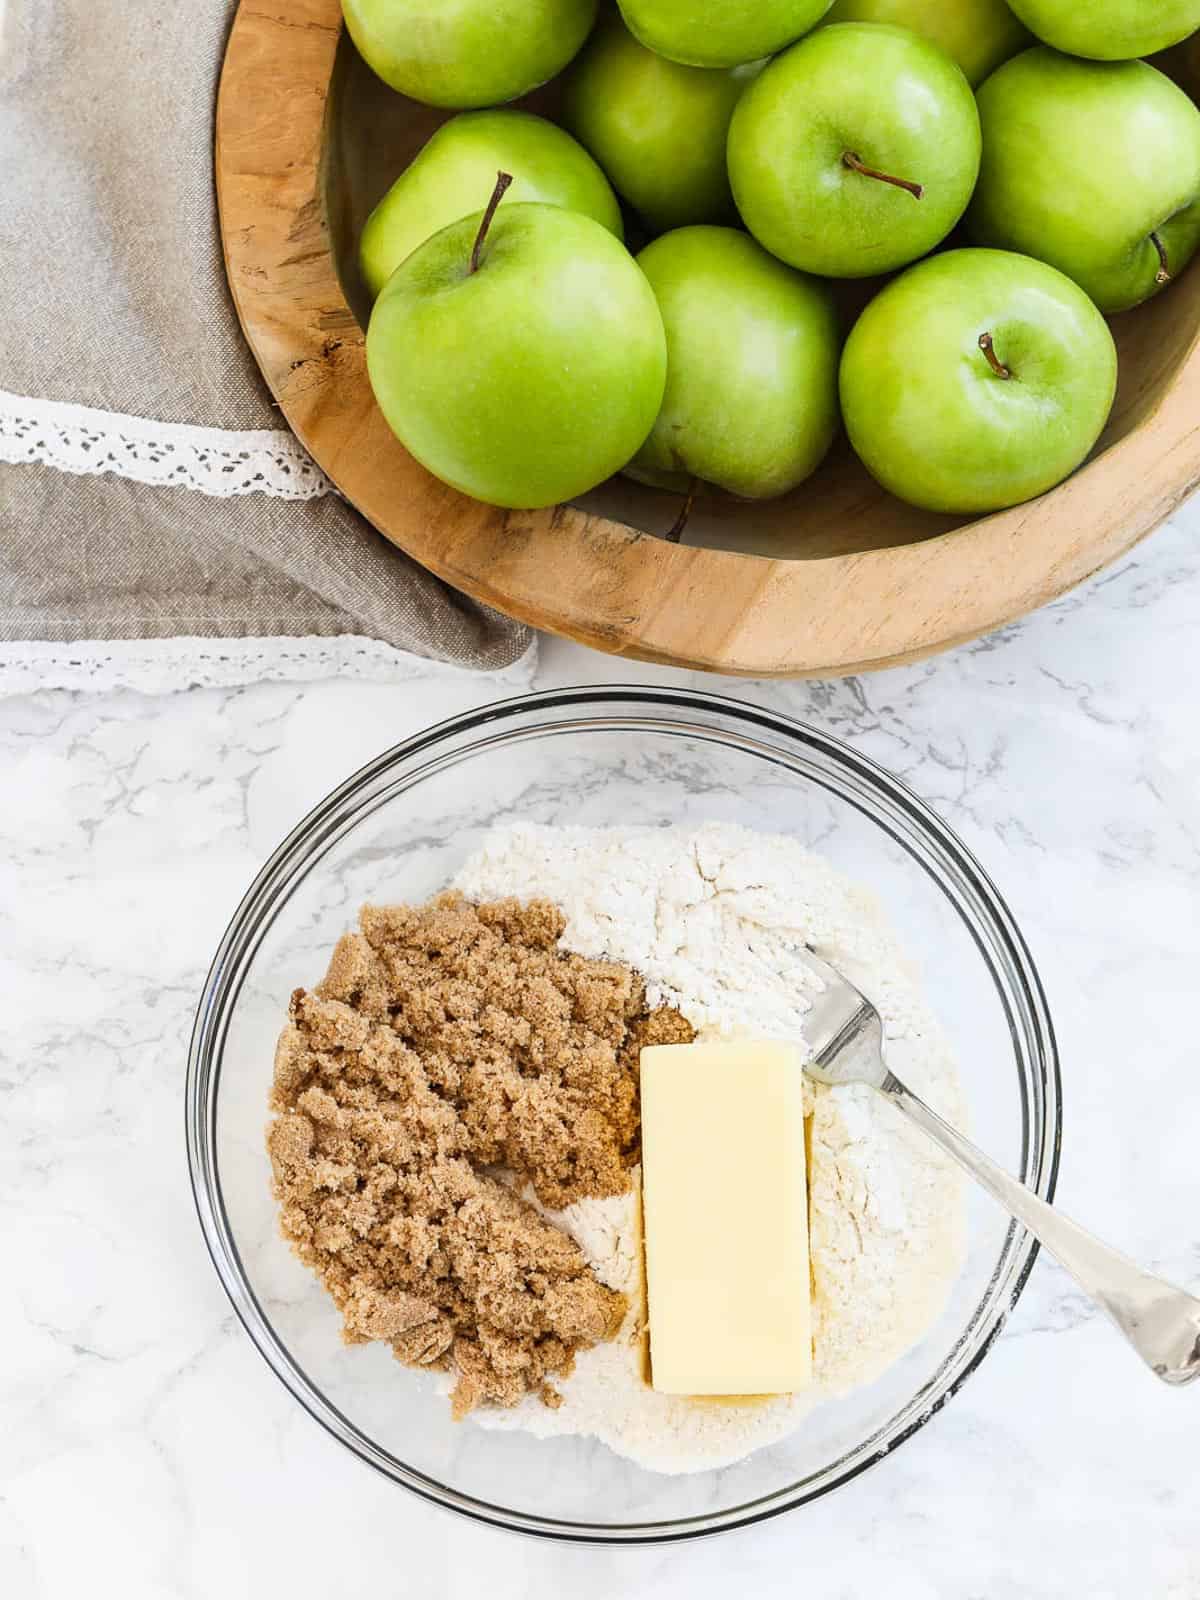 A clear glass bowl with flour, brown sugar, and a cube of butter with a fork to make crumbled topping for apple crumble pie.